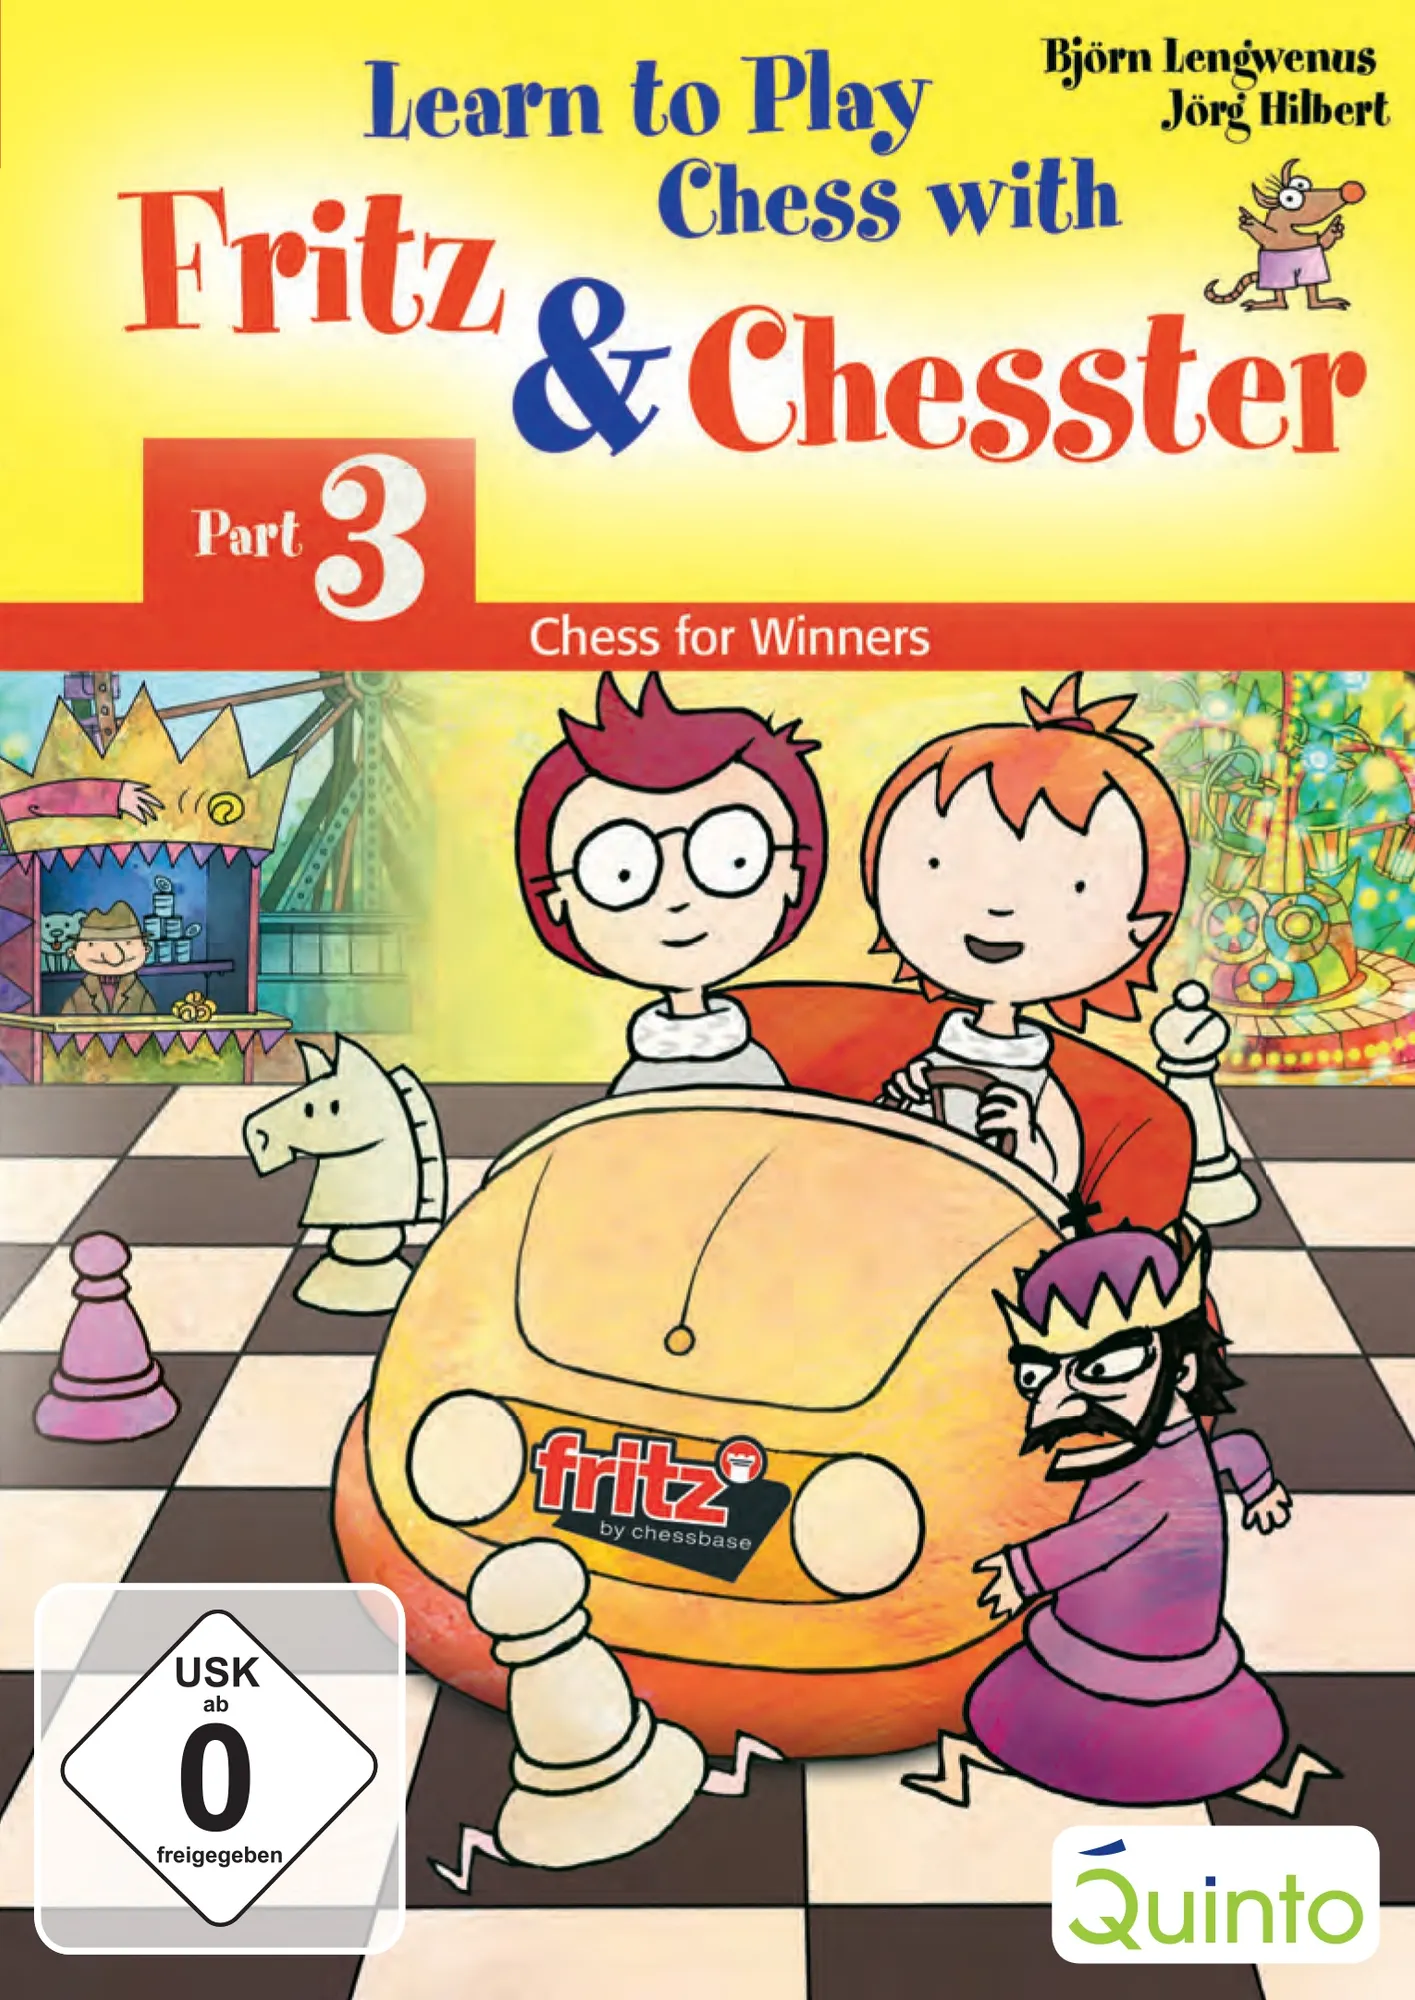 fritz and chesster